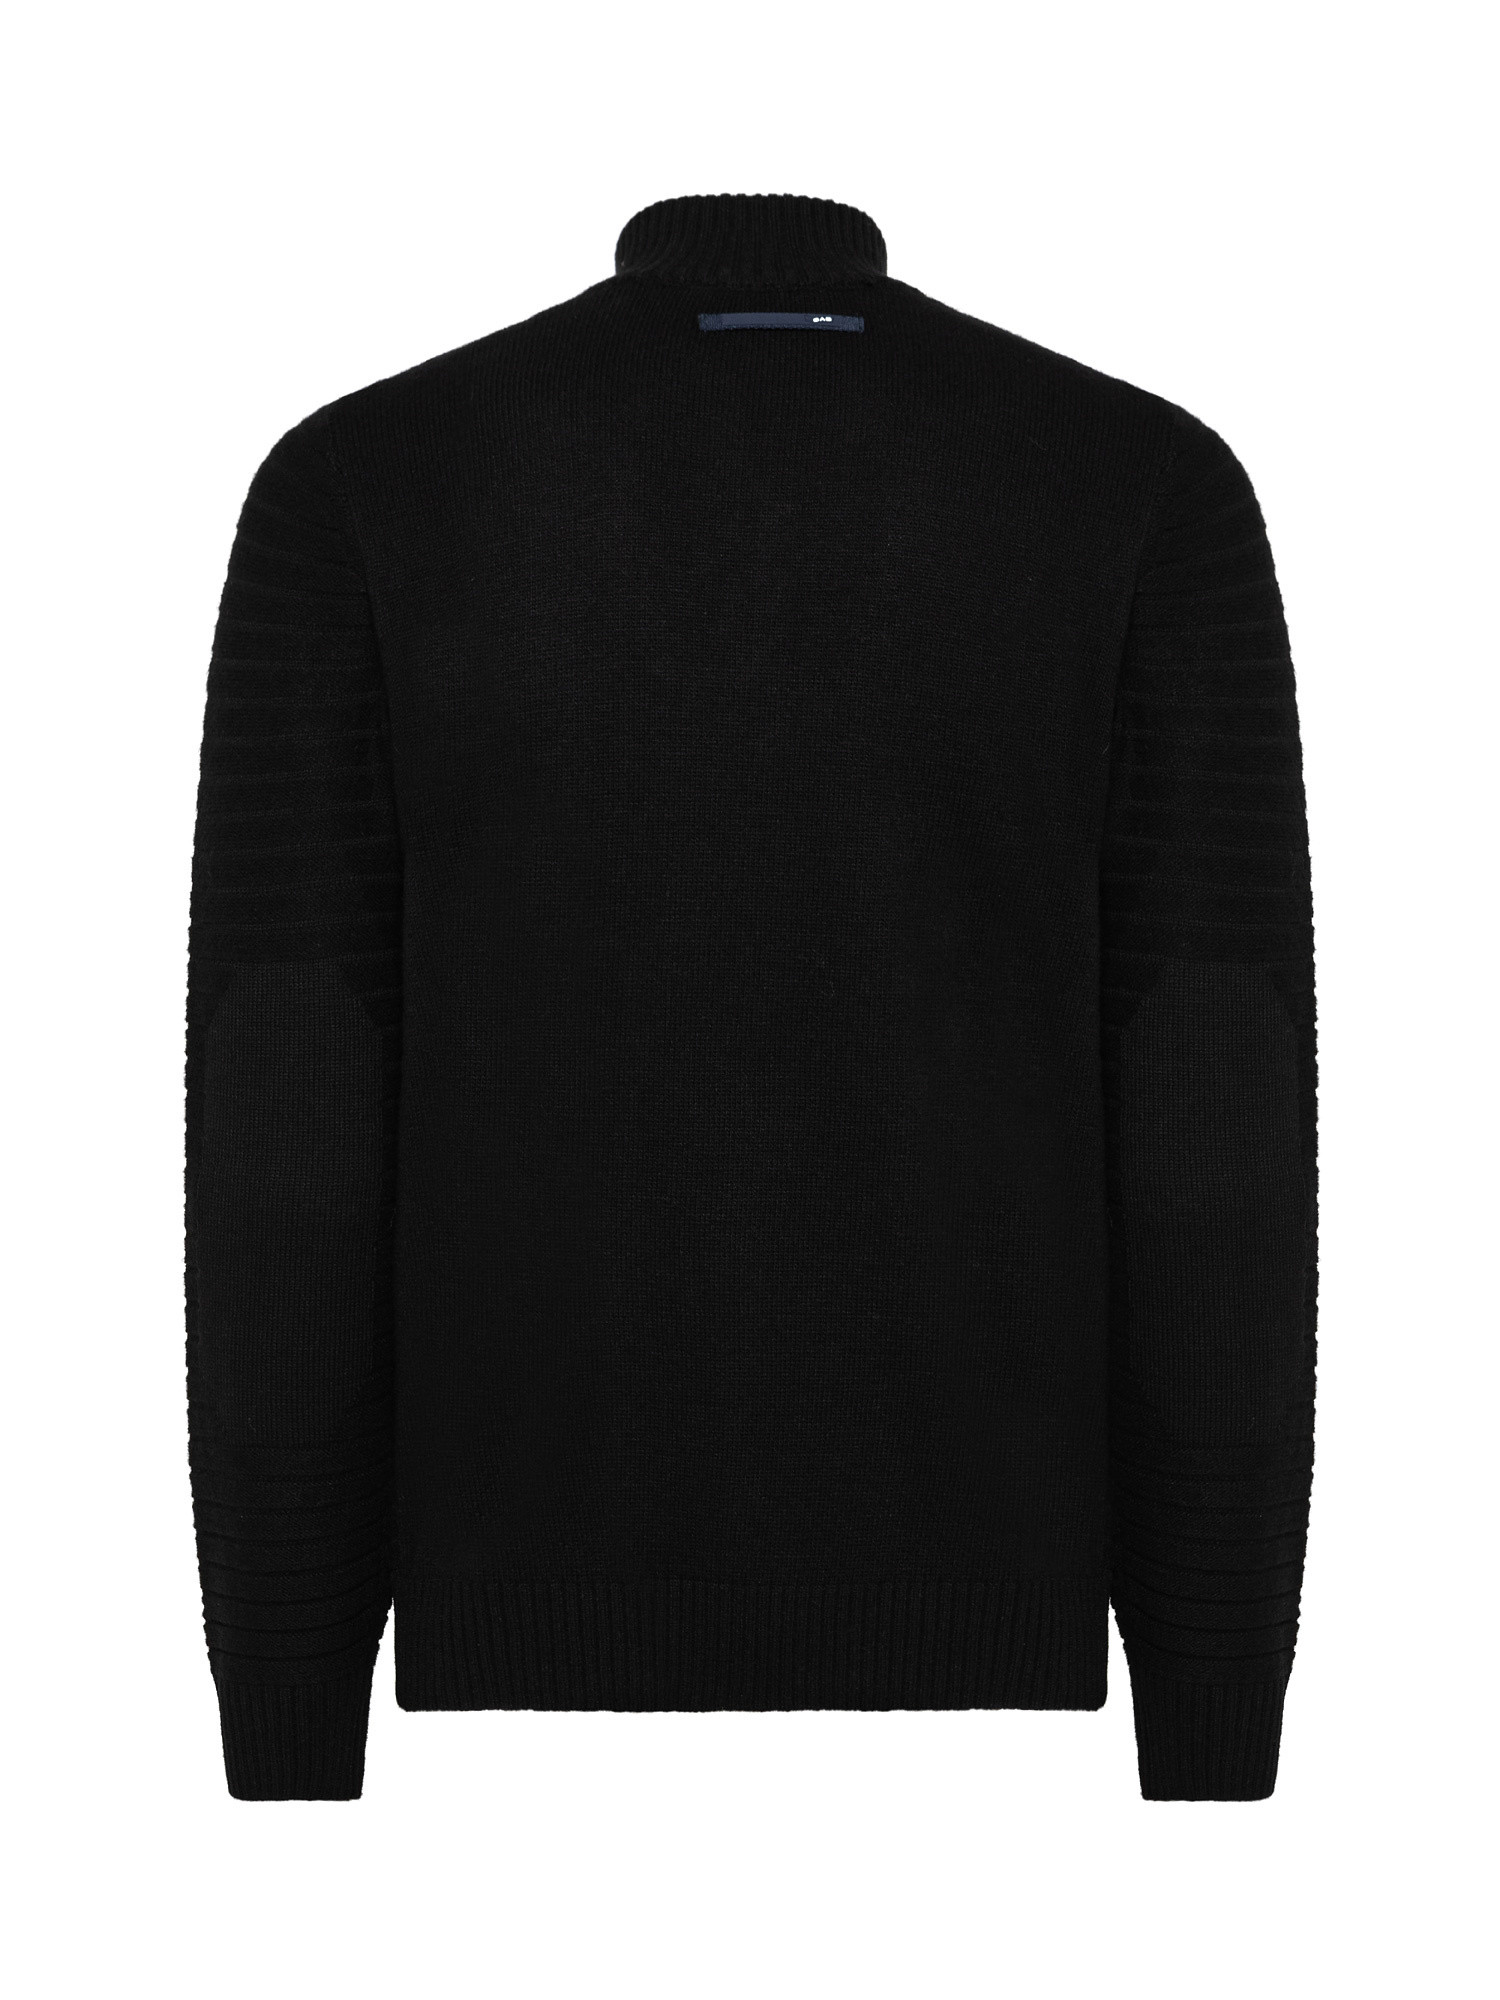 Turtleneck sweater with patches, Black, large image number 1